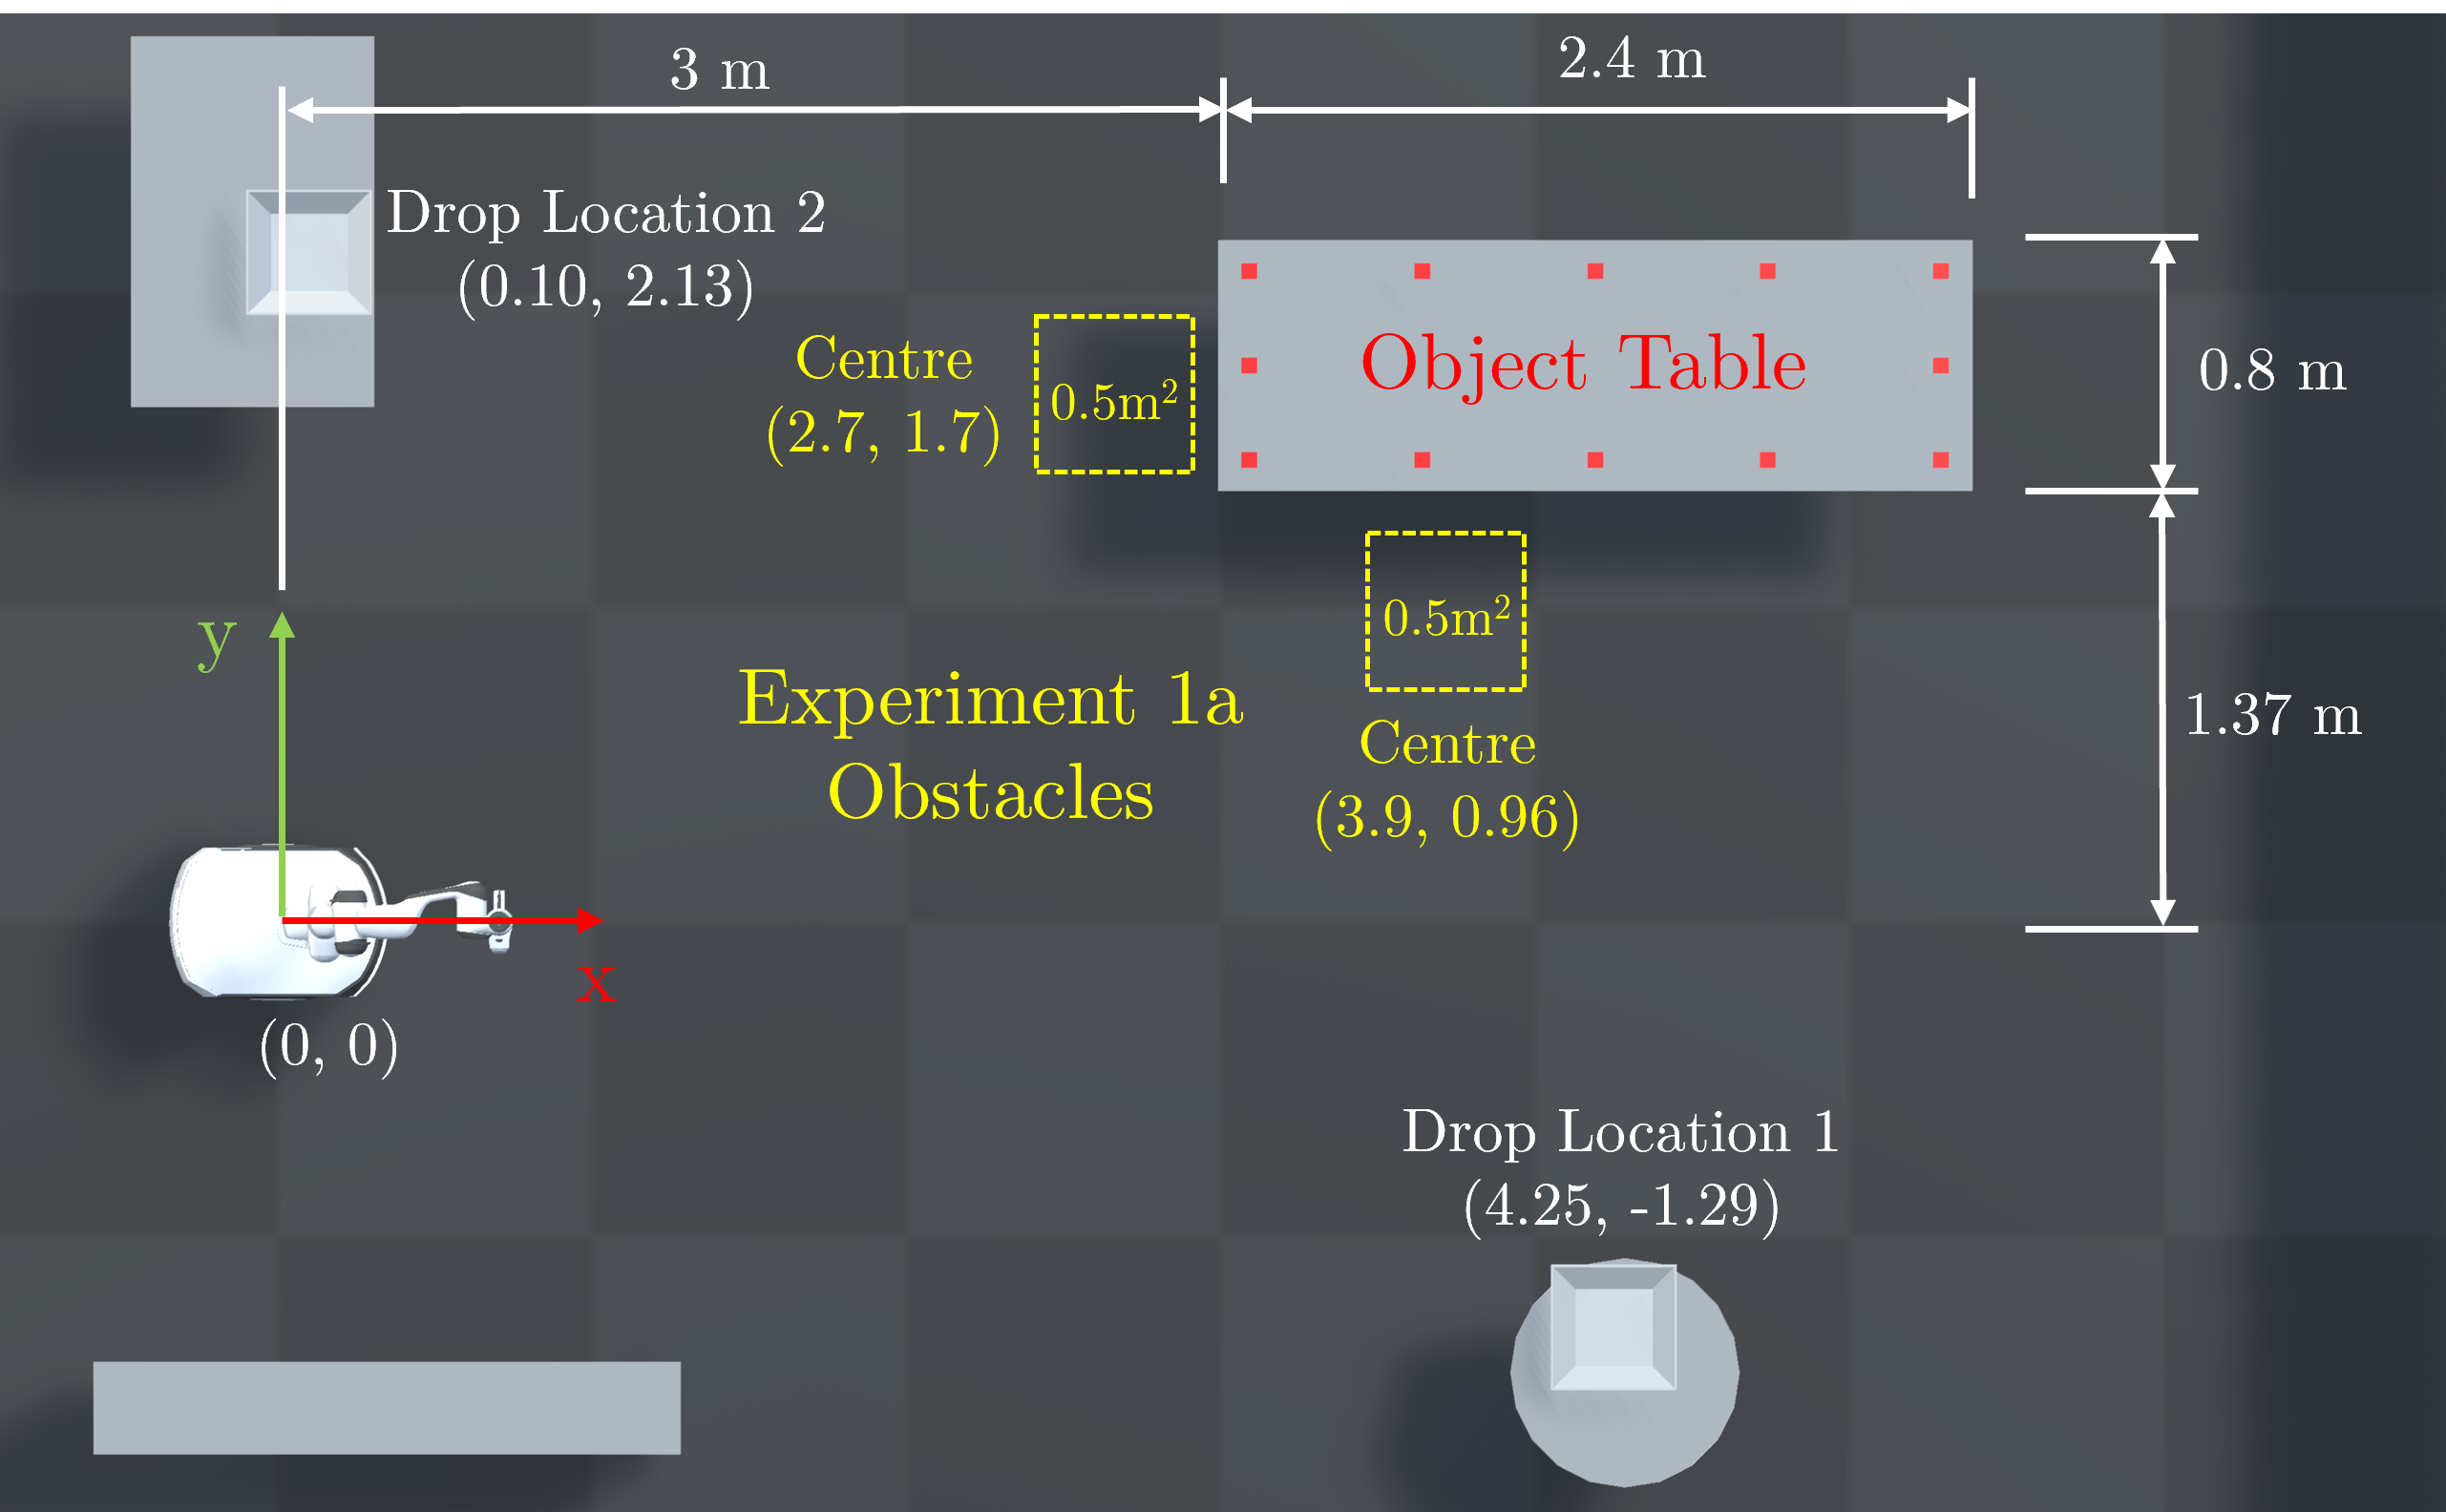 Experiment Layout